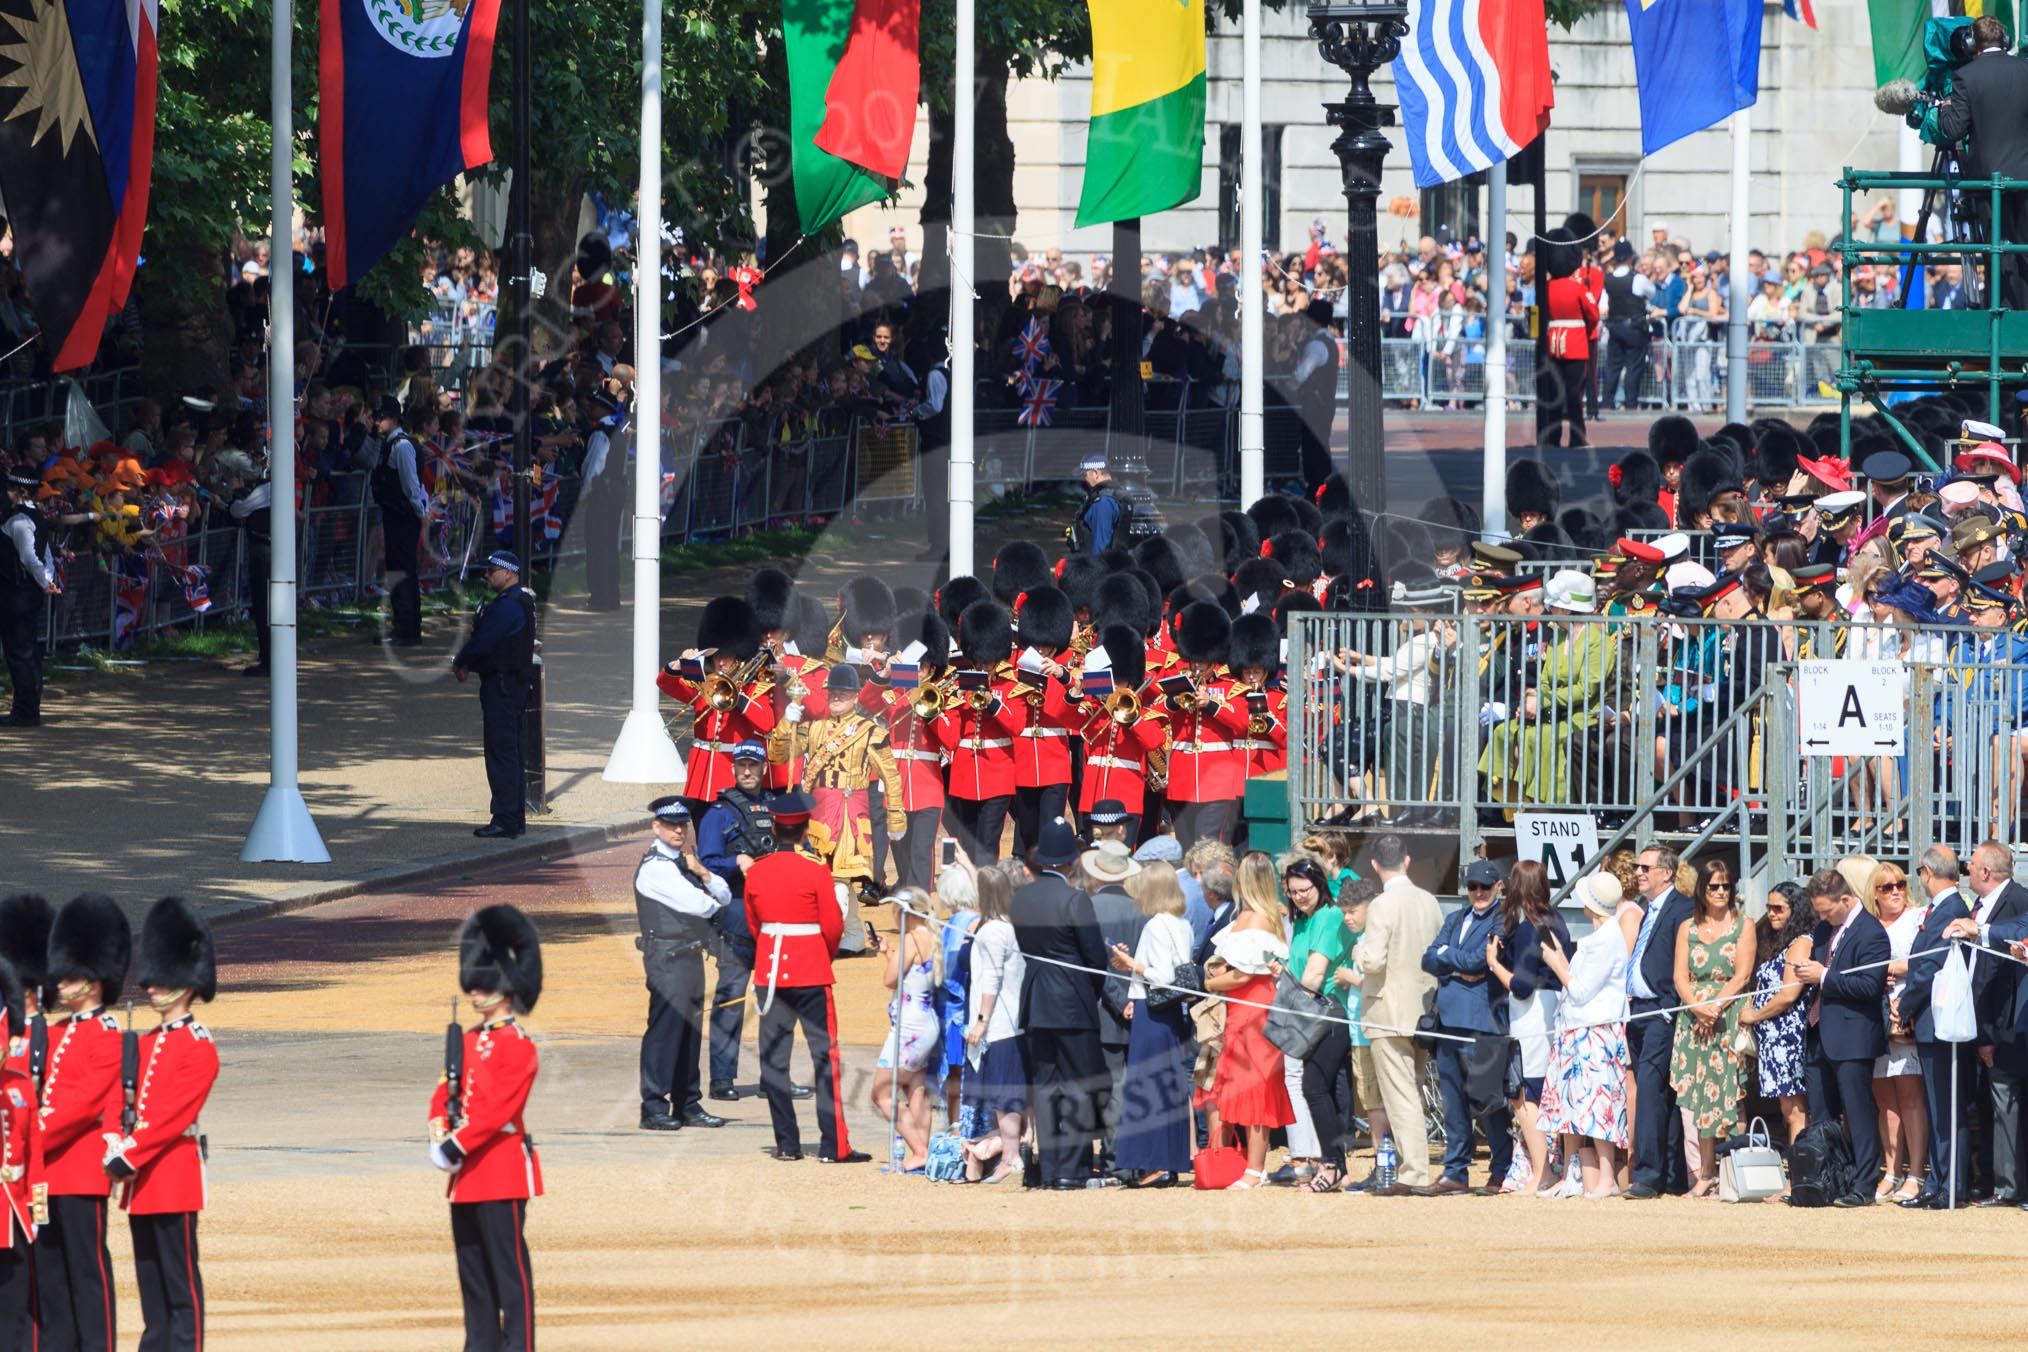 The Band of the Coldstream Guards marching onto Horse Guards Parade during Trooping the Colour 2018, The Queen's Birthday Parade at Horse Guards Parade, Westminster, London, 9 June 2018, 10:30.